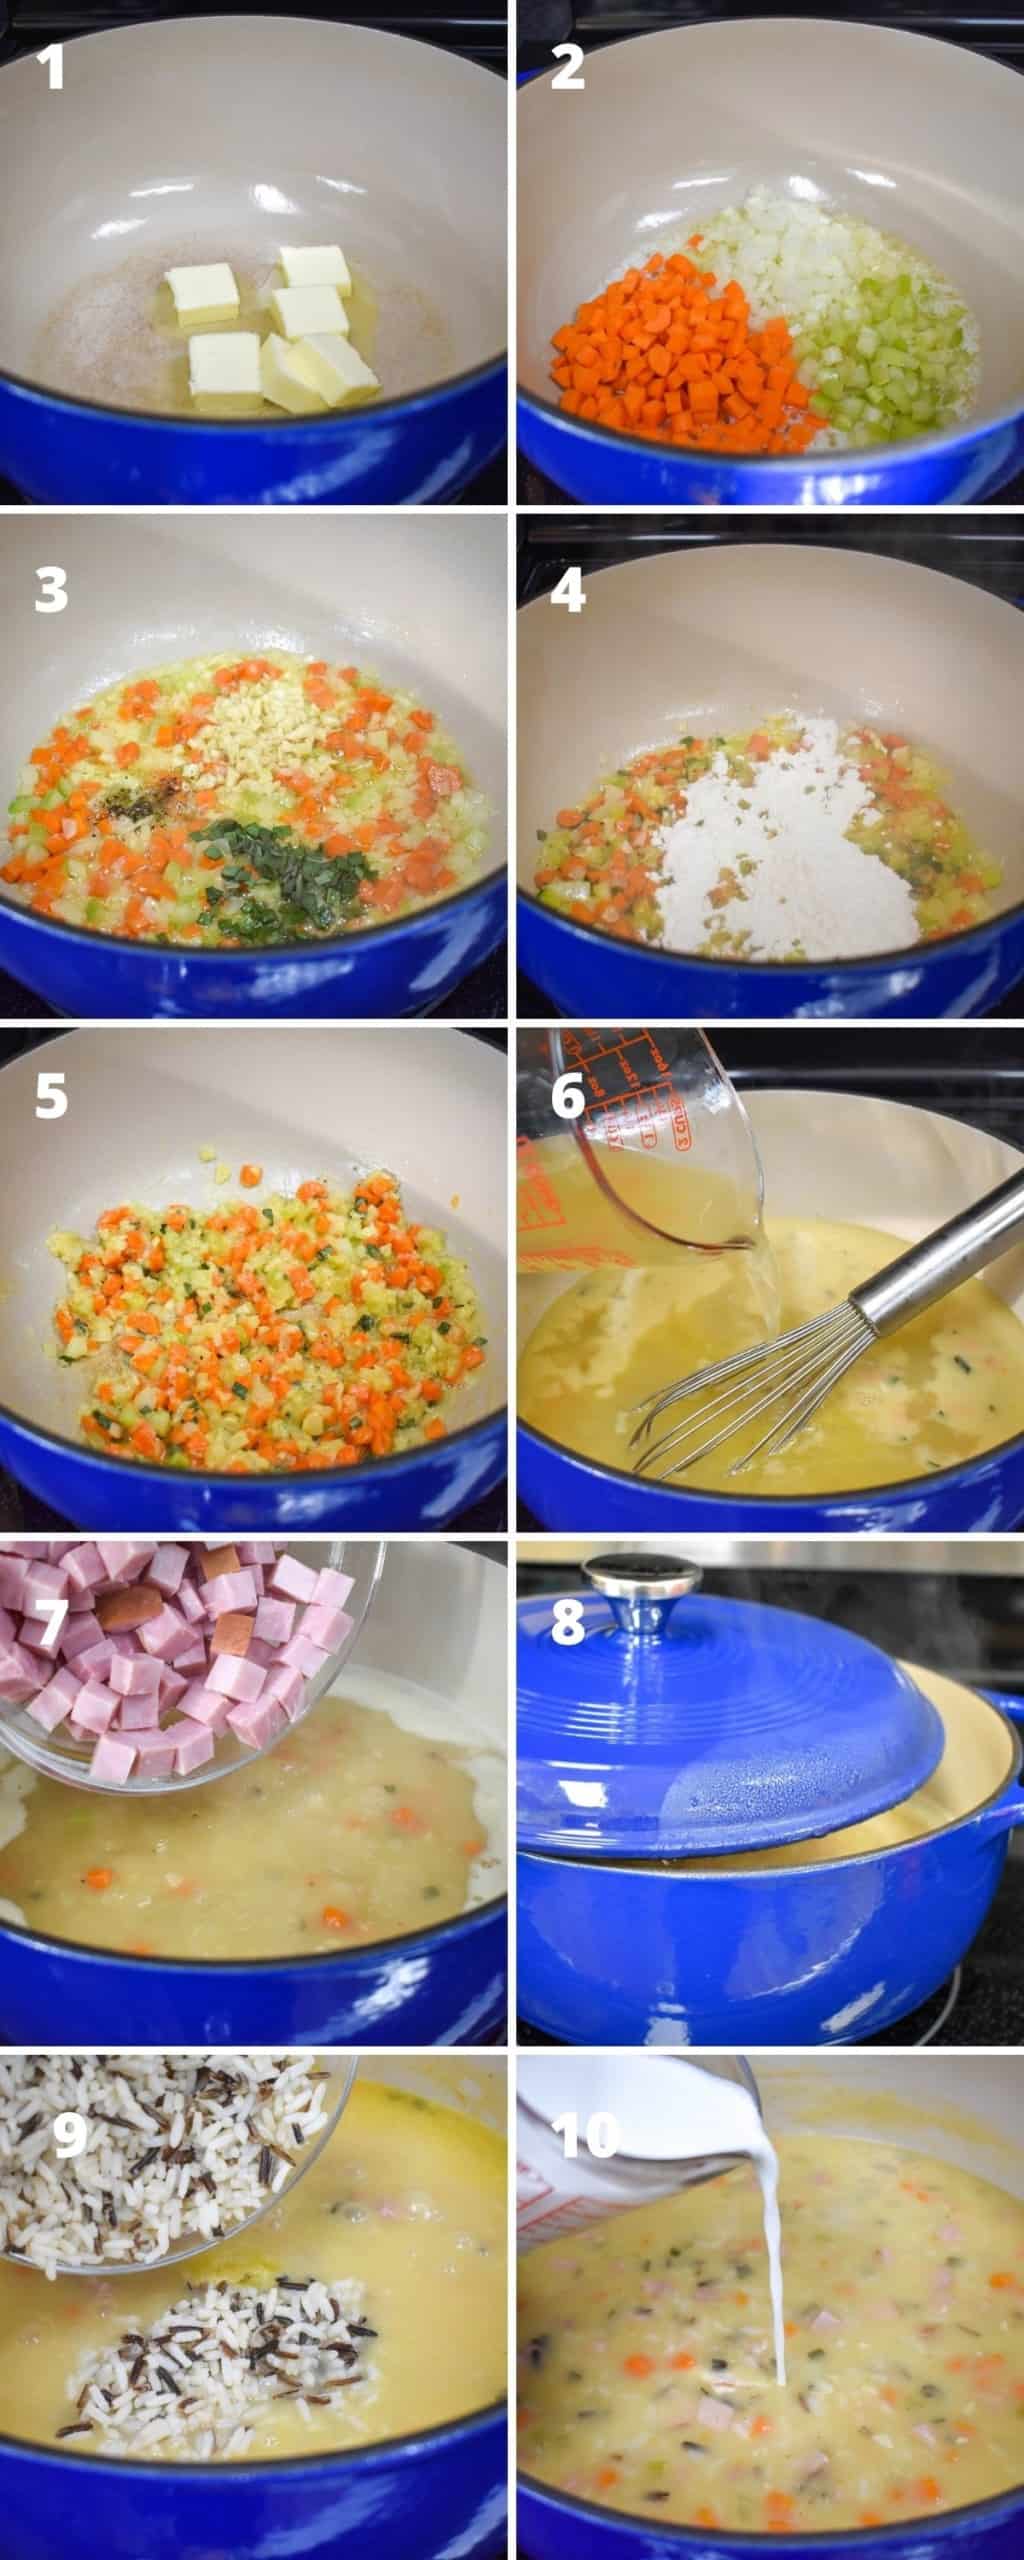 A collage of ten images showing the steps to making the creamy ham and wild rice soup in a large, blue pot with an off-white interior.